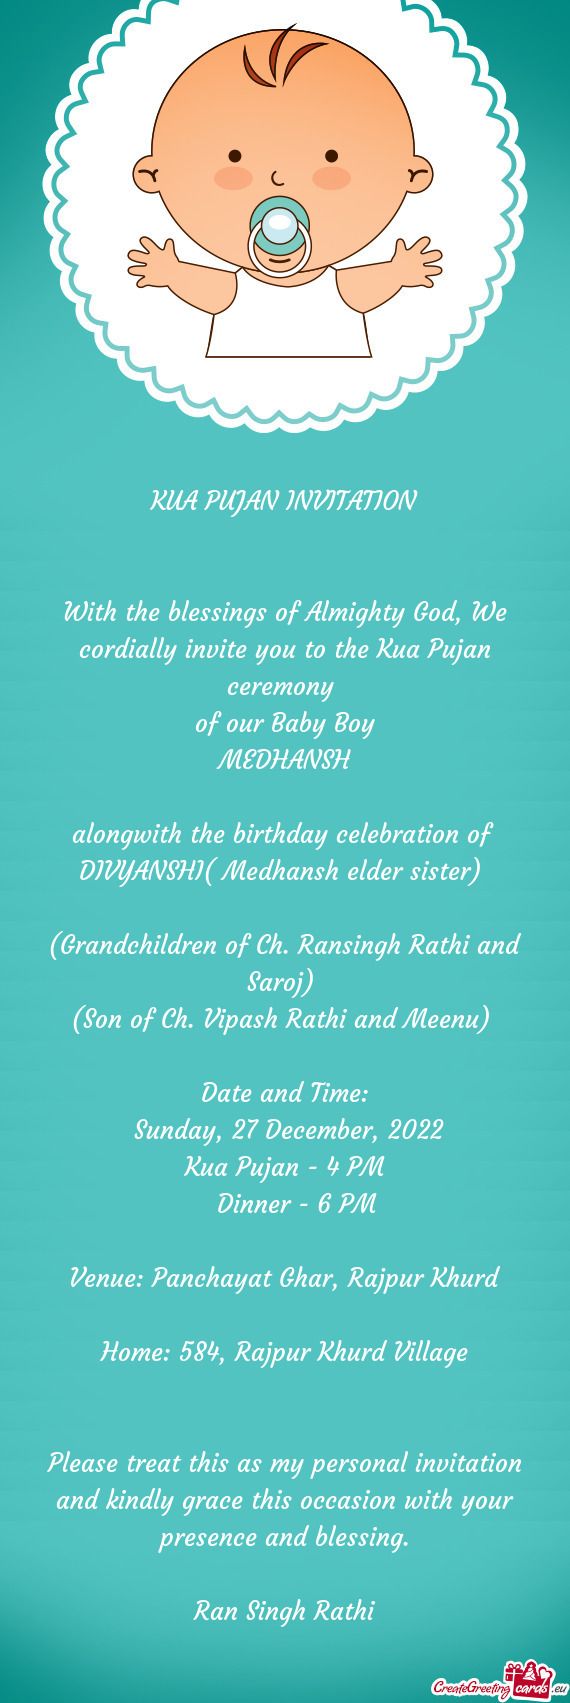 With the blessings of Almighty God, We cordially invite you to the Kua Pujan ceremony